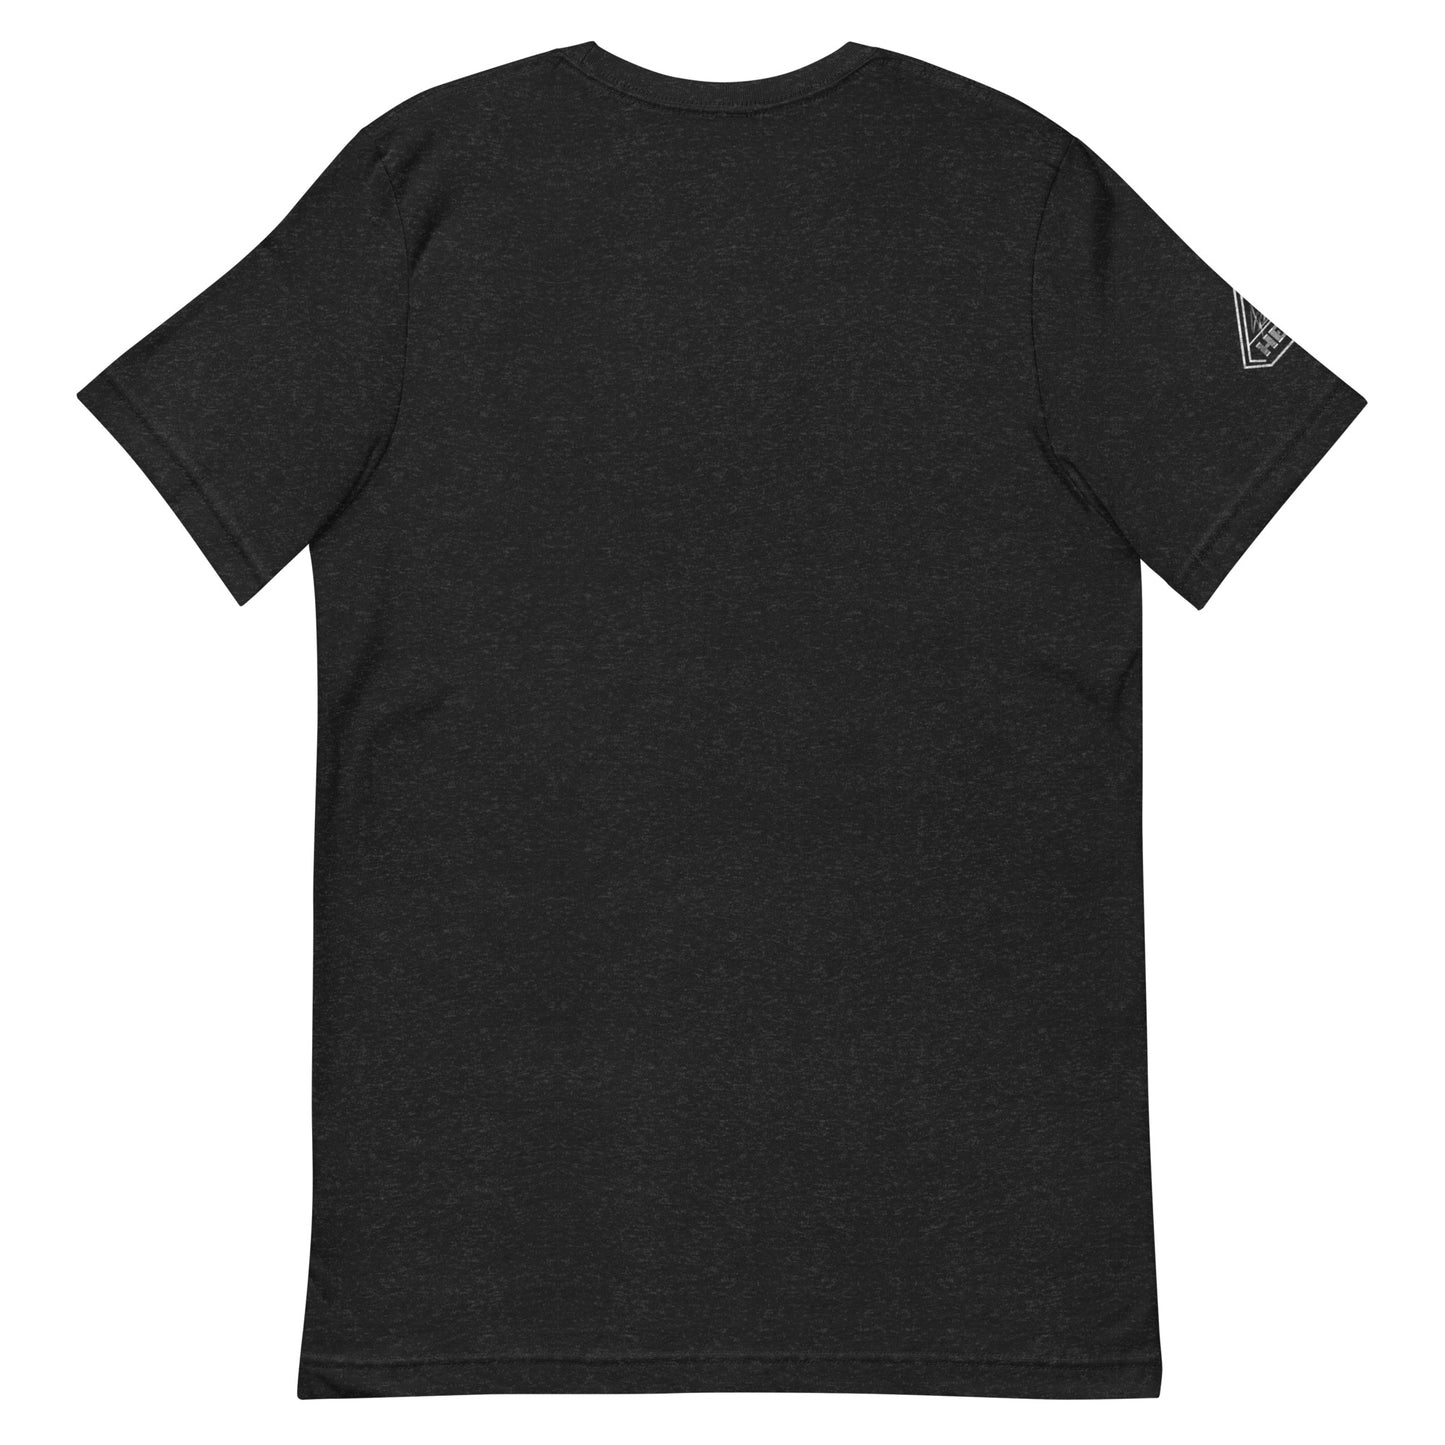 BODY BY SLEEP DEPRIVATION, Graphic Tee Shirt, Black